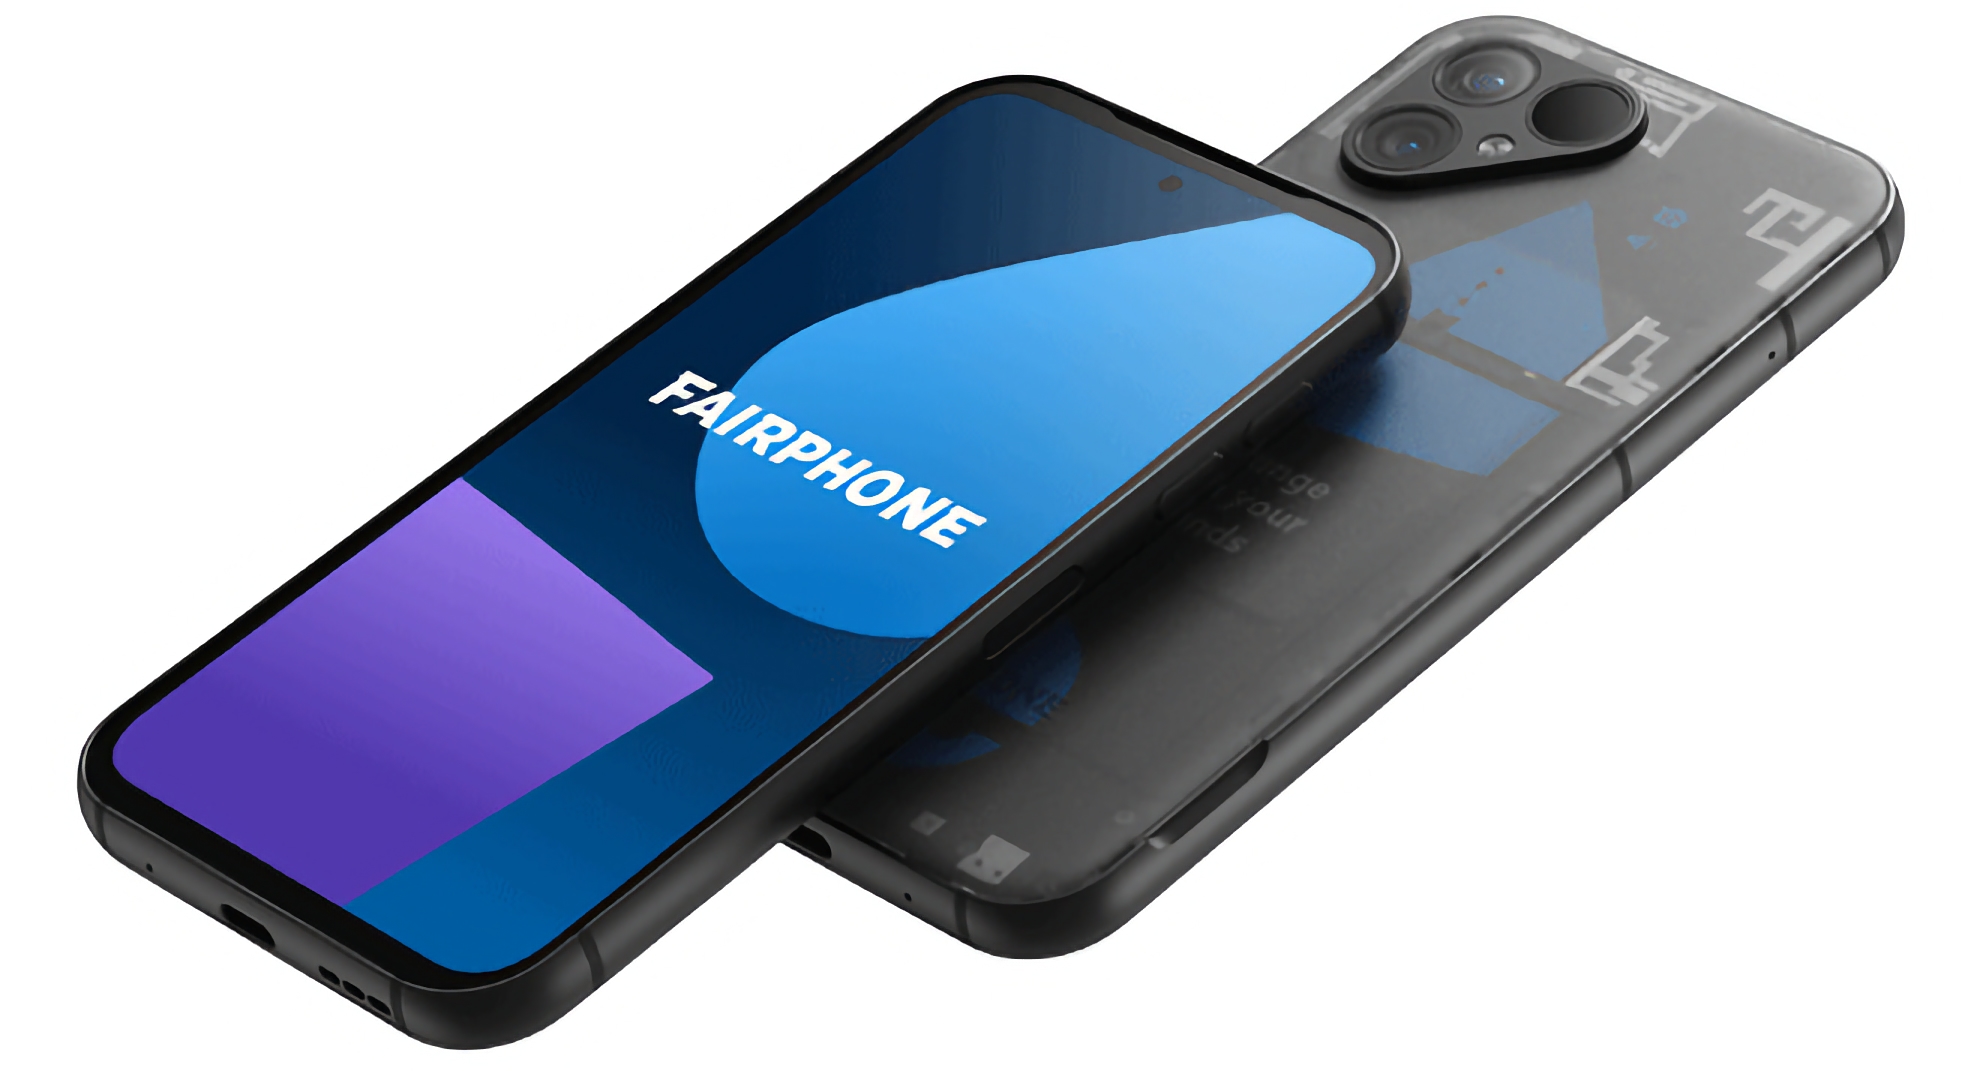 Insider: the Fairphone 5 design smartphone with 90Hz OLED screen, Qualcomm QCM6490 chip and 50 MP camera will debut on 31 August